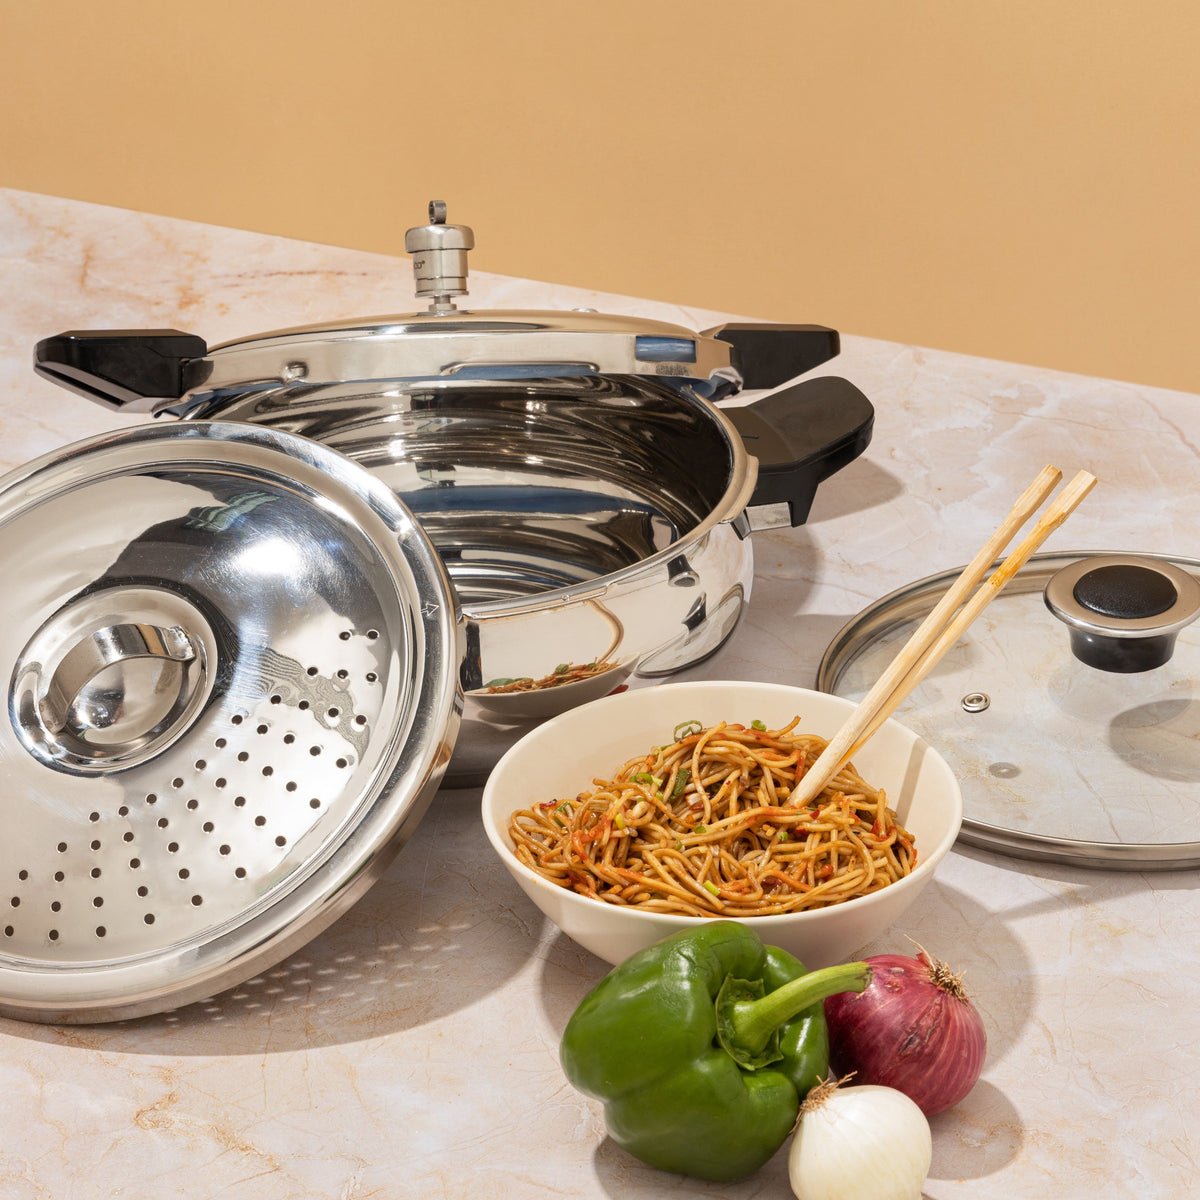 AISI 304 Grade Stainless Steel Pressure Cooker